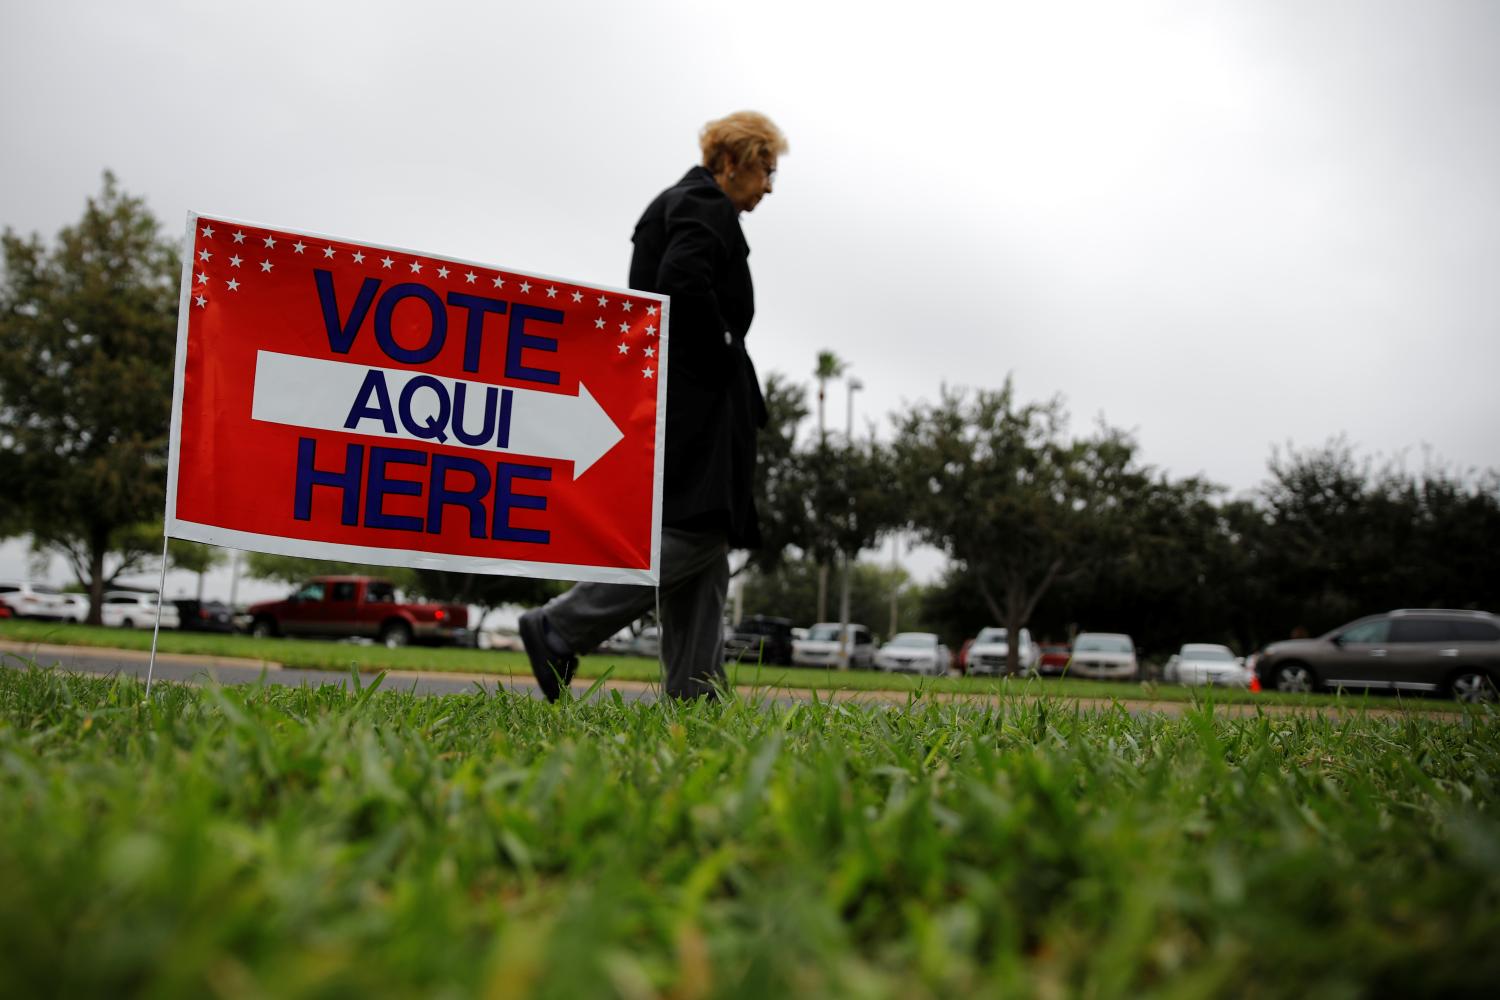 A woman arrives at a polling station in Lark Community Center as the early voting for midterm elections started in Texas, in McAllen, Texas, U.S., October 22, 2018. REUTERS/Carlos Barria - RC16F40C5550